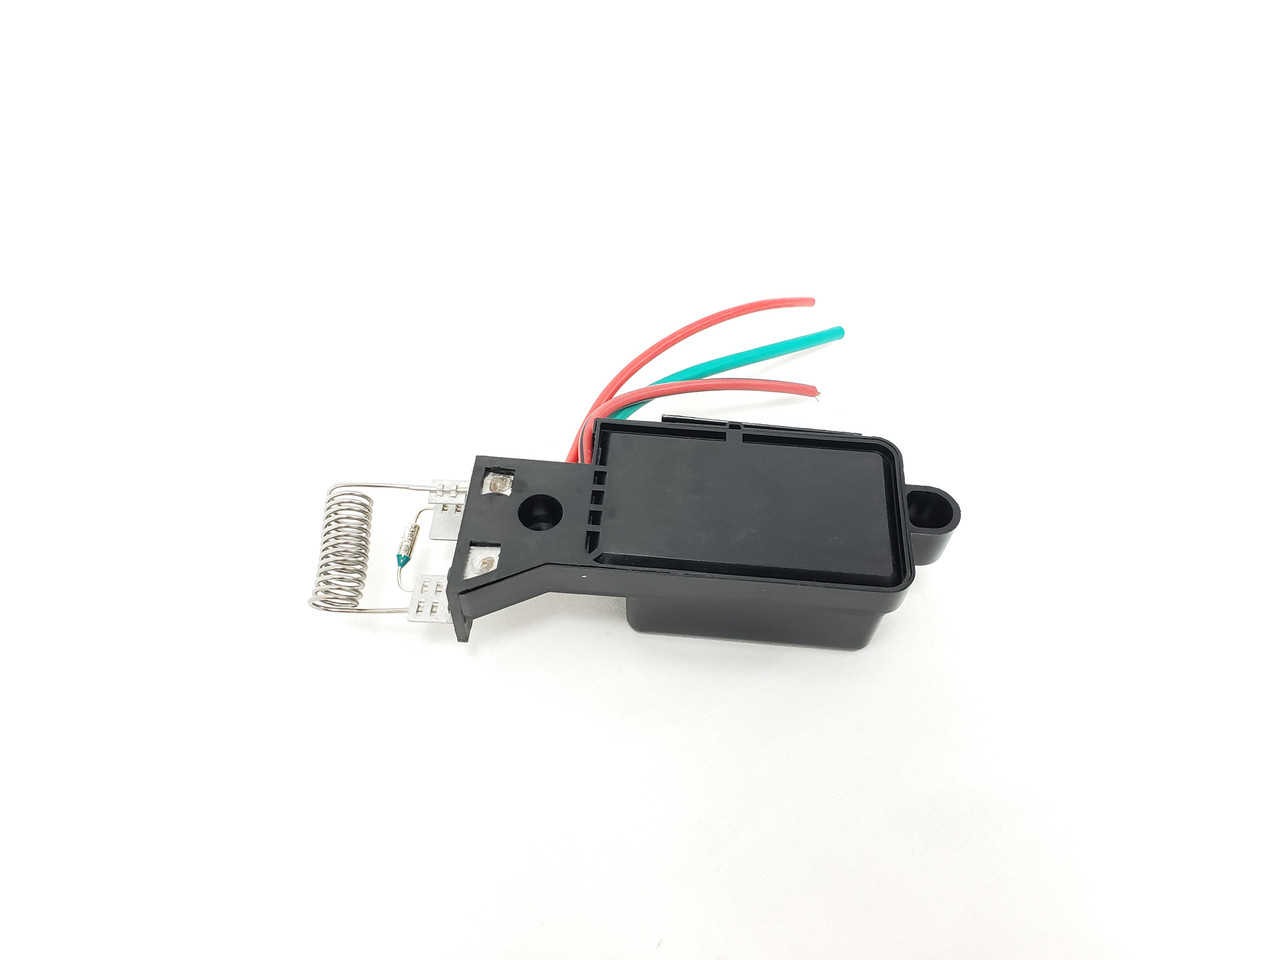 https://cdn11.bigcommerce.com/s-351ed/images/stencil/{:size}/products/24706/234086/power_steering_fan_relay_for_mini_convertible_r52_cabrio_2005_to_2008_s-models_only_83RSJKA_24706__60069.1704510233.jpg?c=2